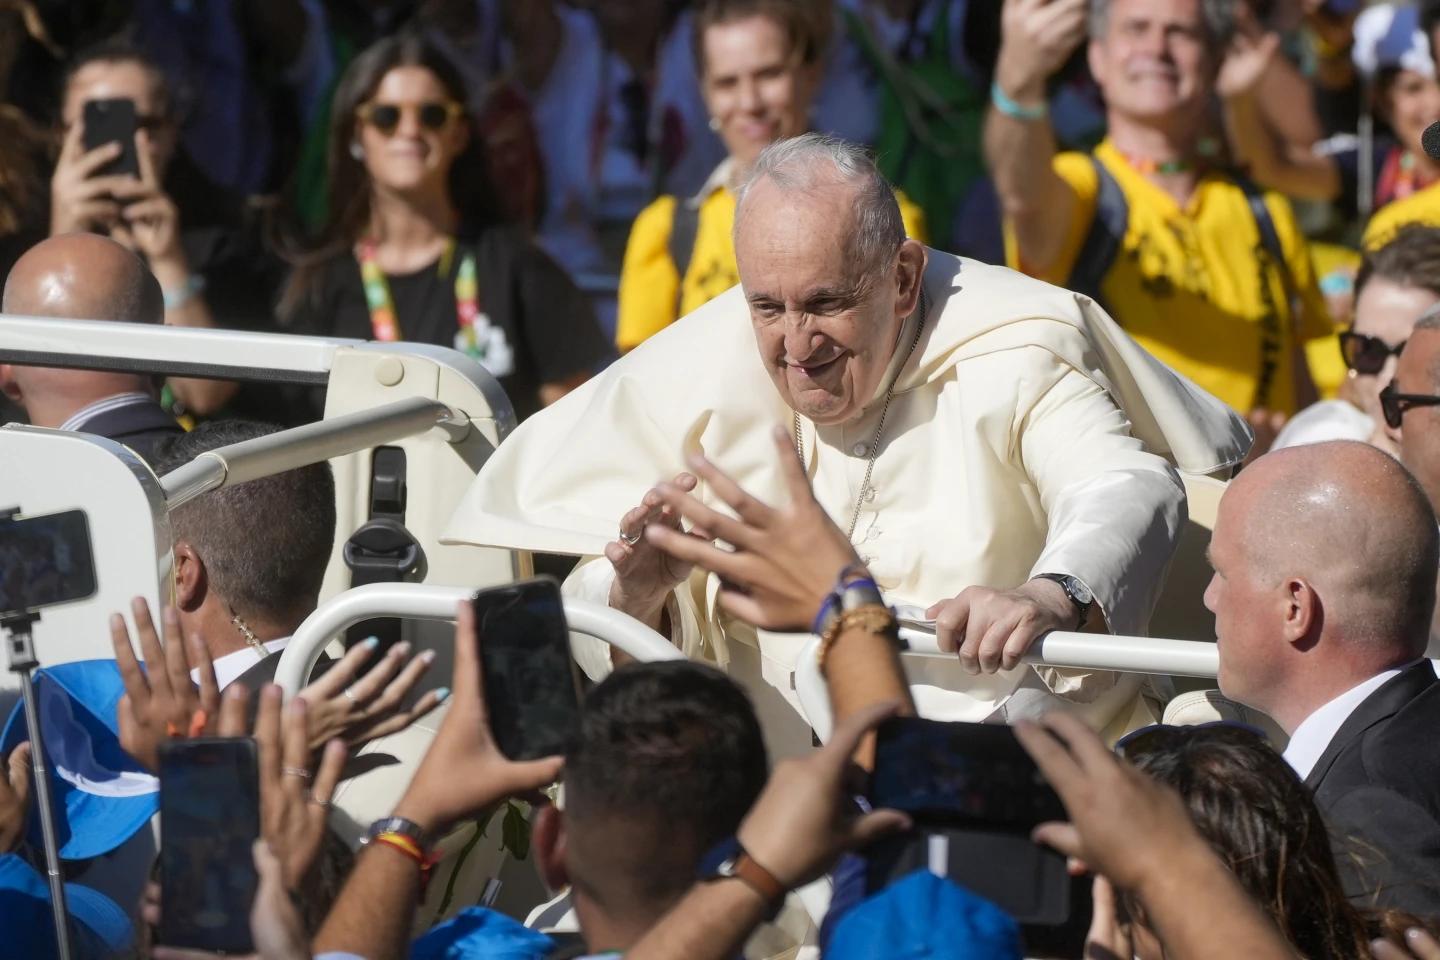 In new interview, Pope says he’s a ‘stone in the shoe’ for his critics